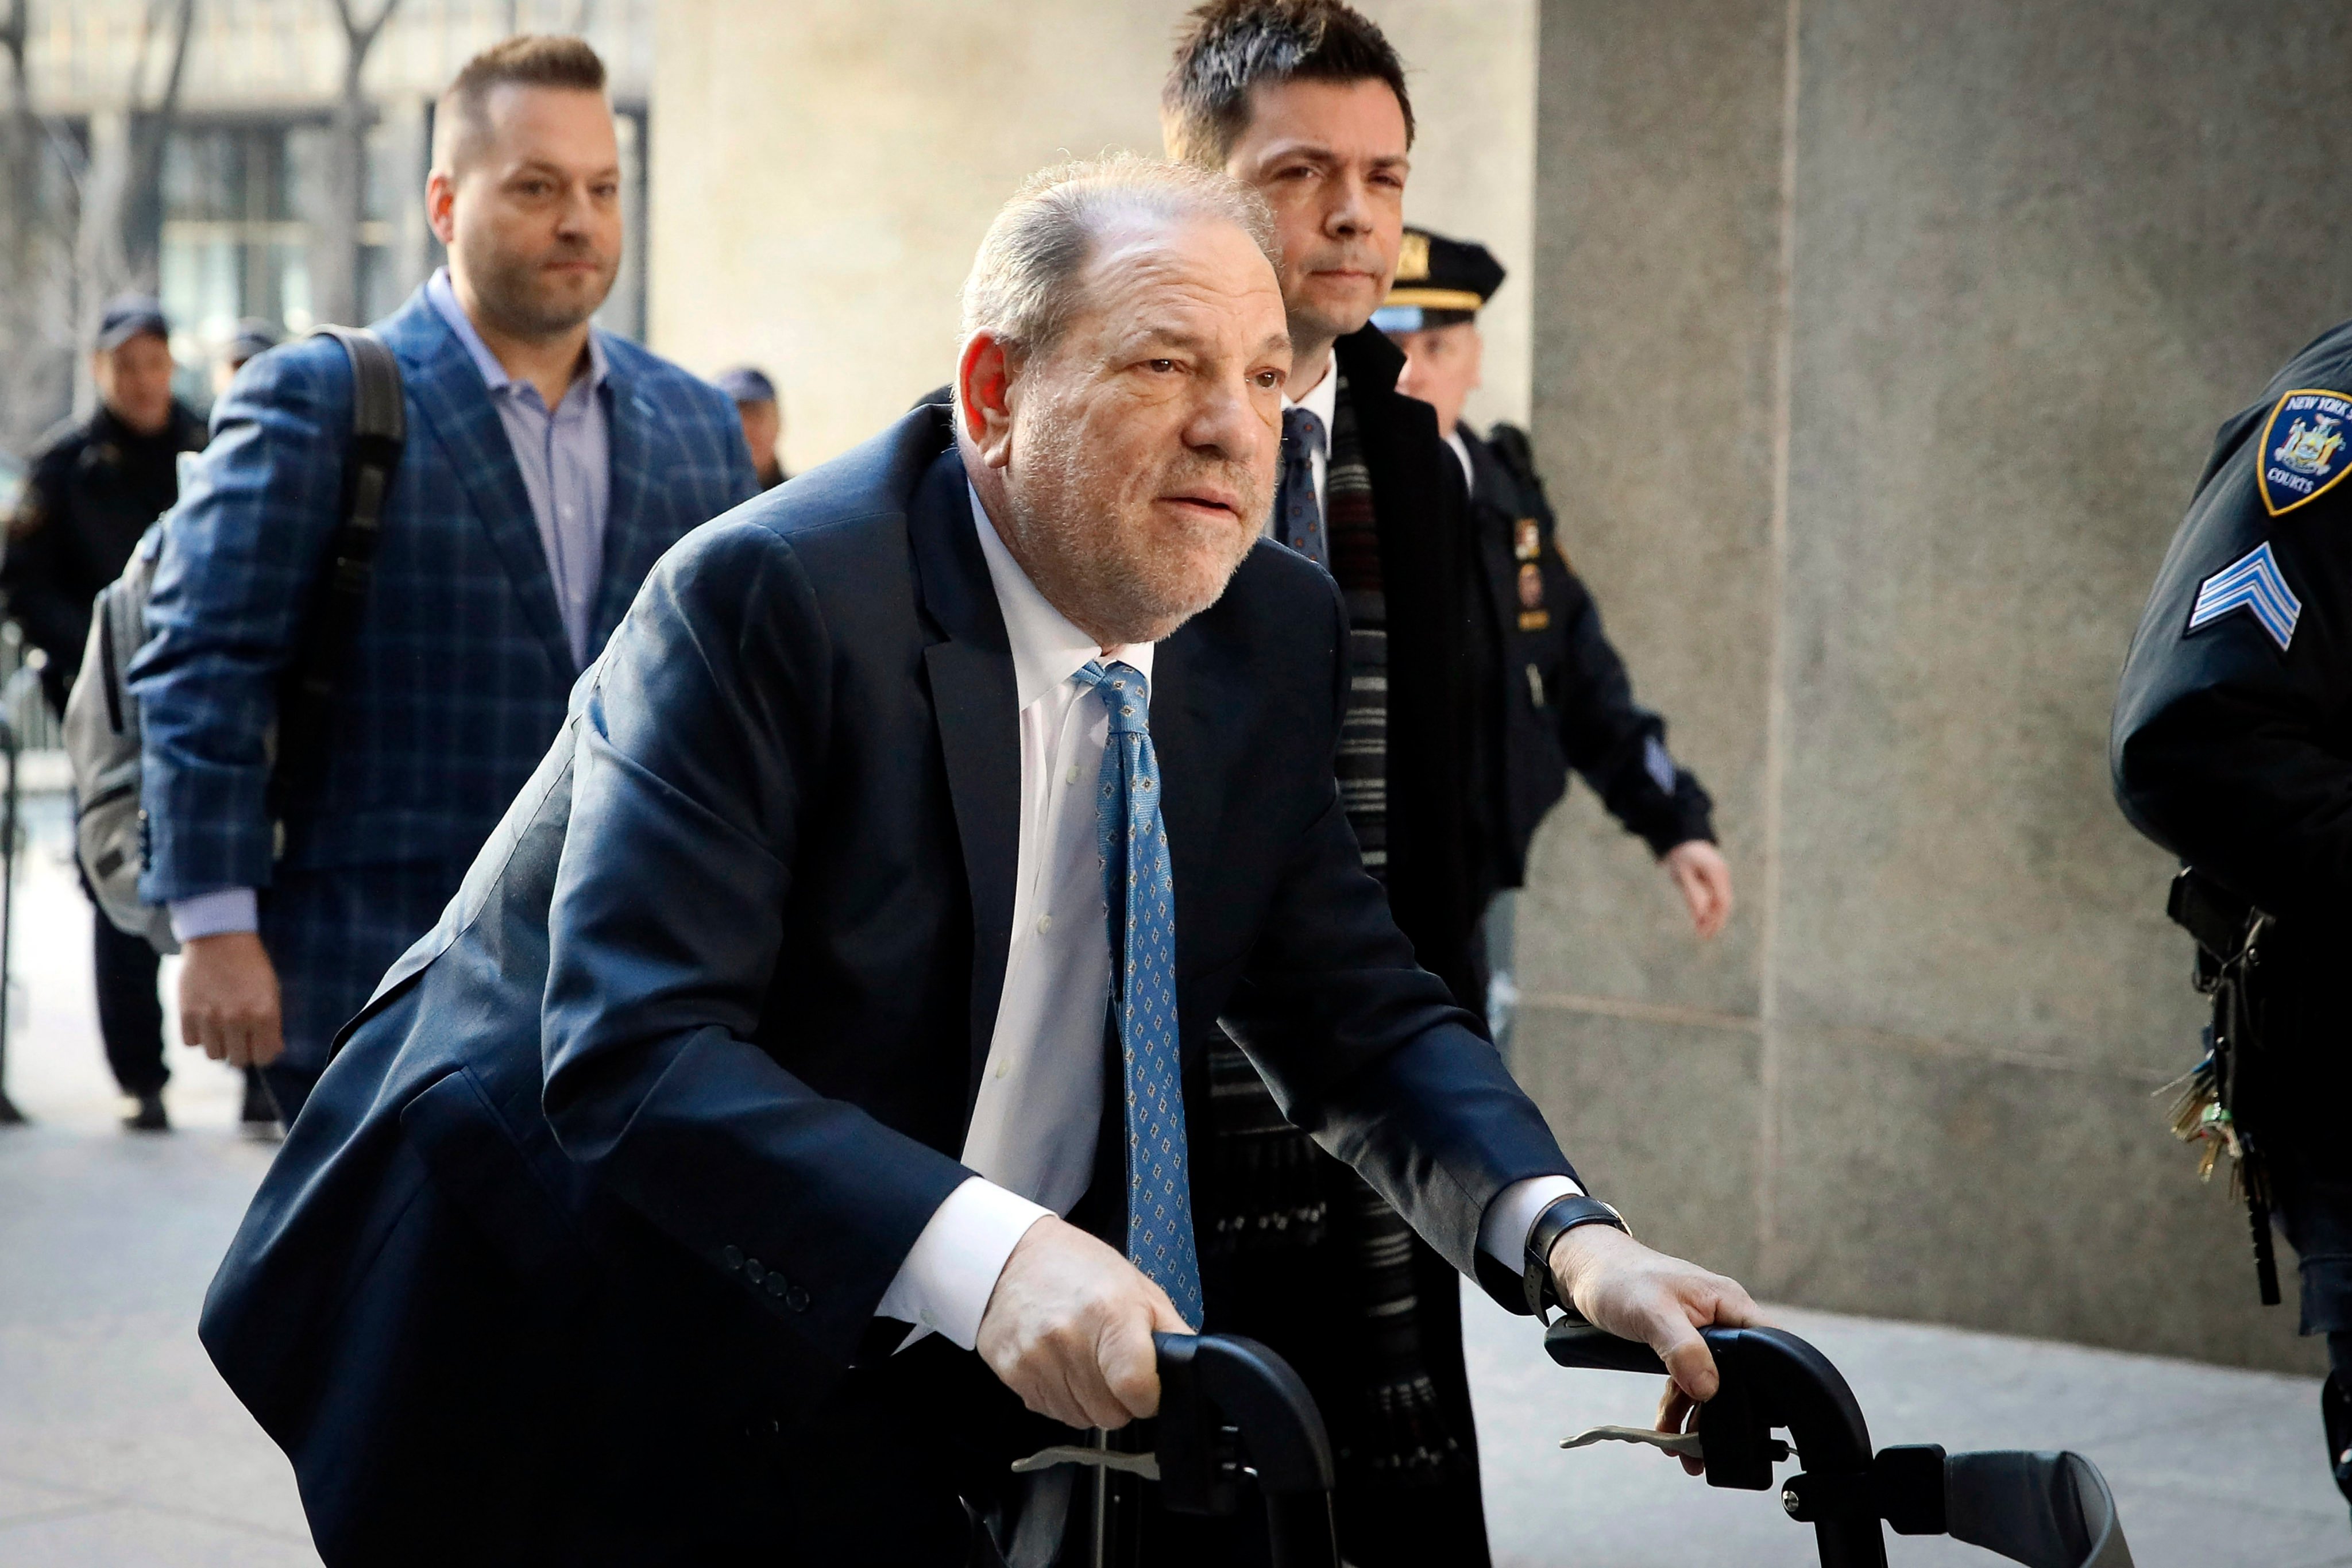 Harvey Weinstein arrives at a New York courthouse in February 2020. Photo: AP